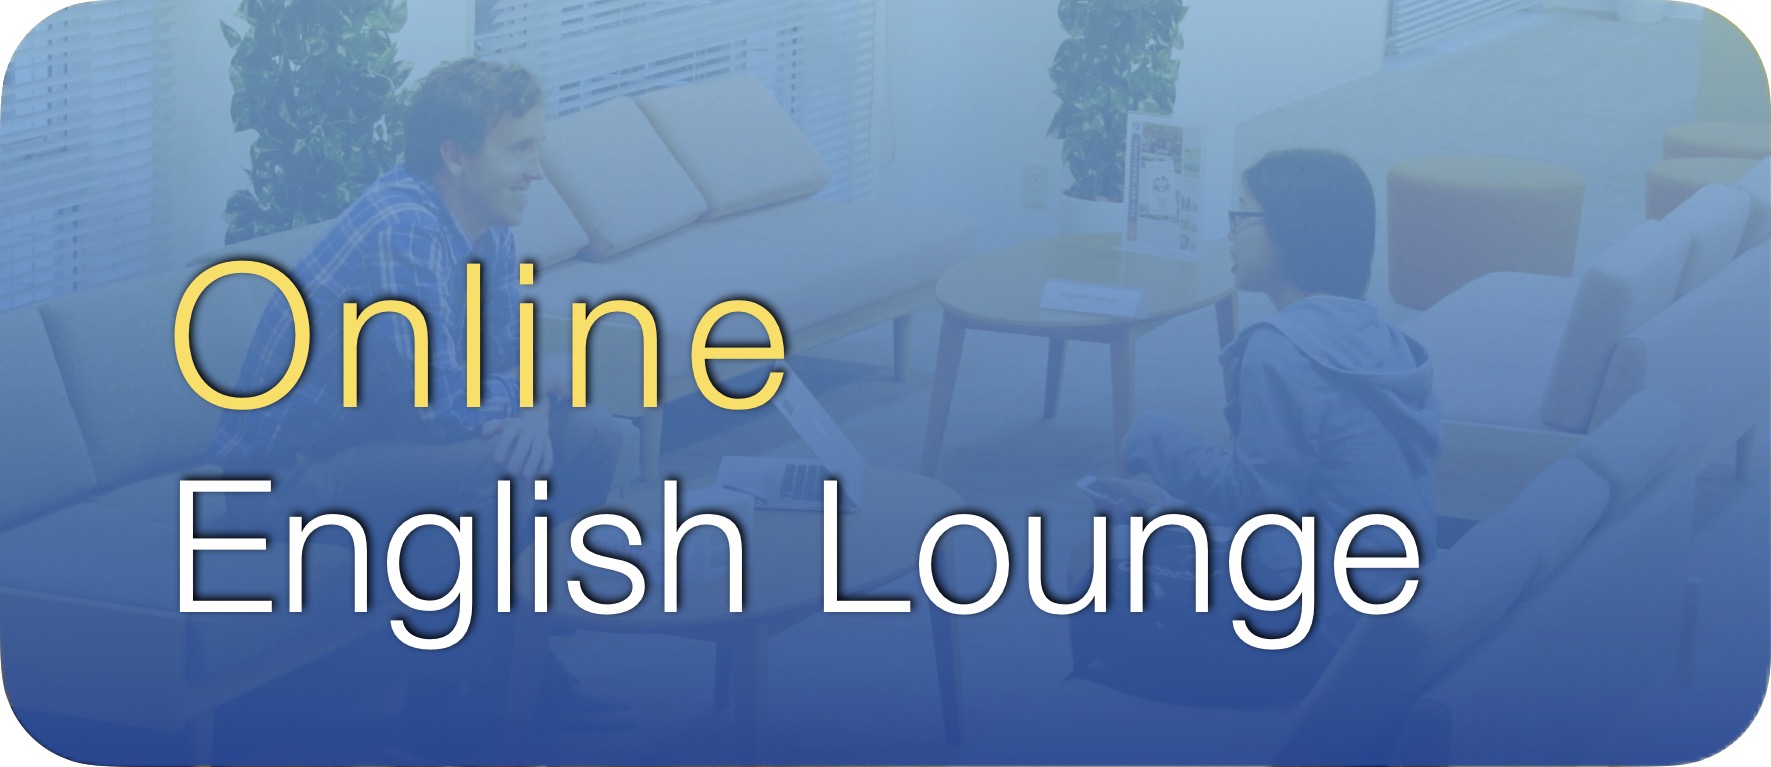 Online English Lounge Button 2020